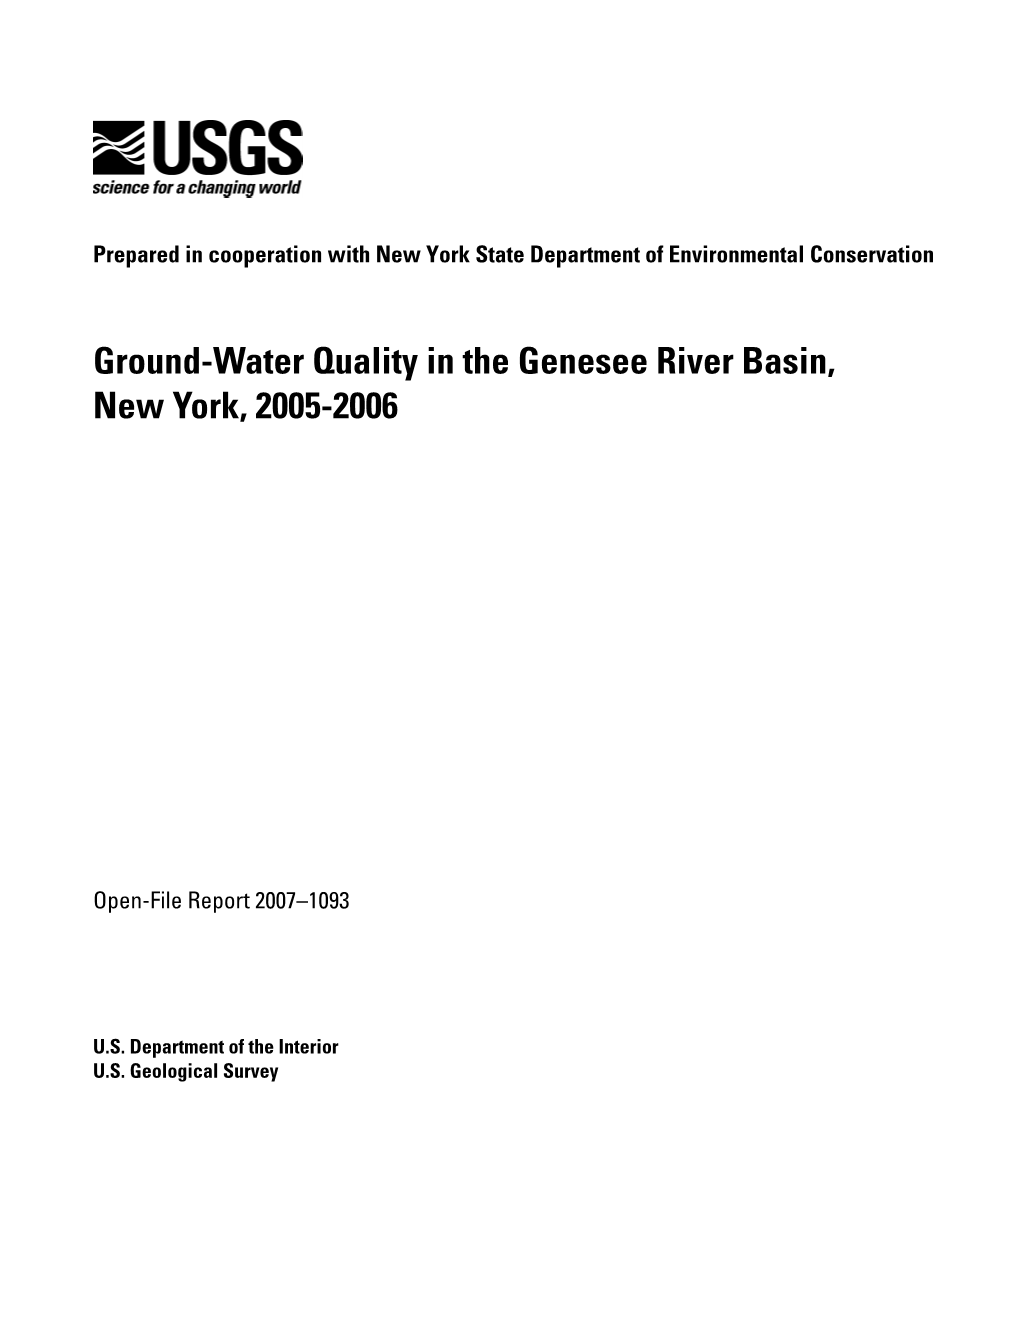 Ground-Water Quality in the Genesee River Basin, New York, 2005-2006